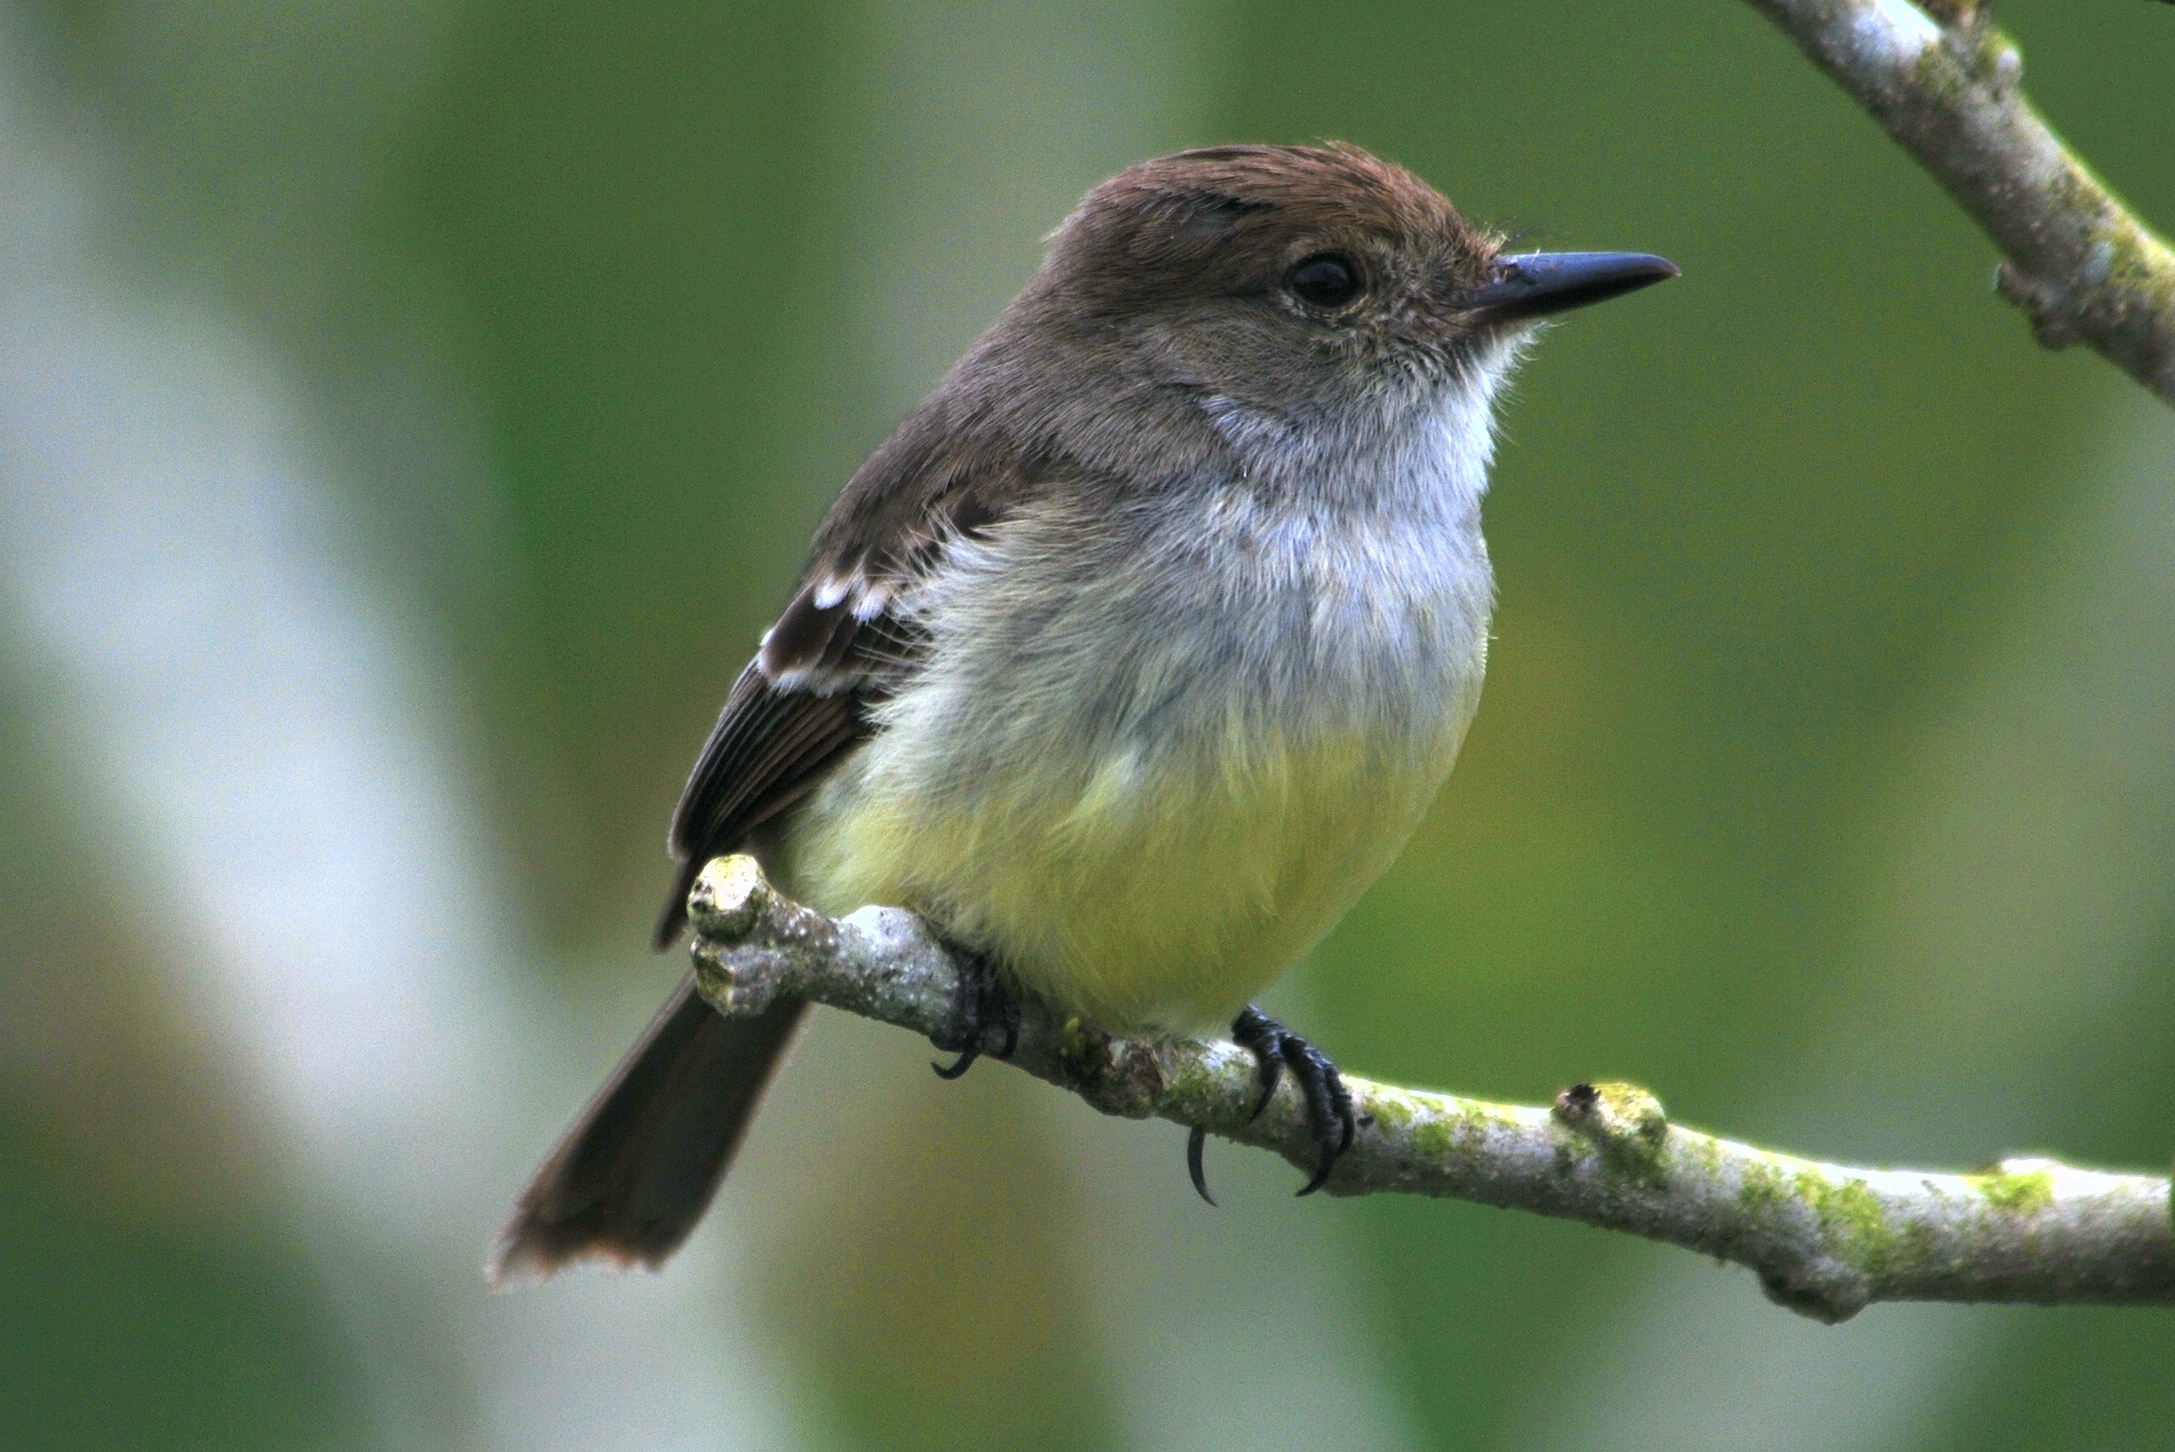 Click picture to see more Large-billed (Galpagos) Flycatchers.